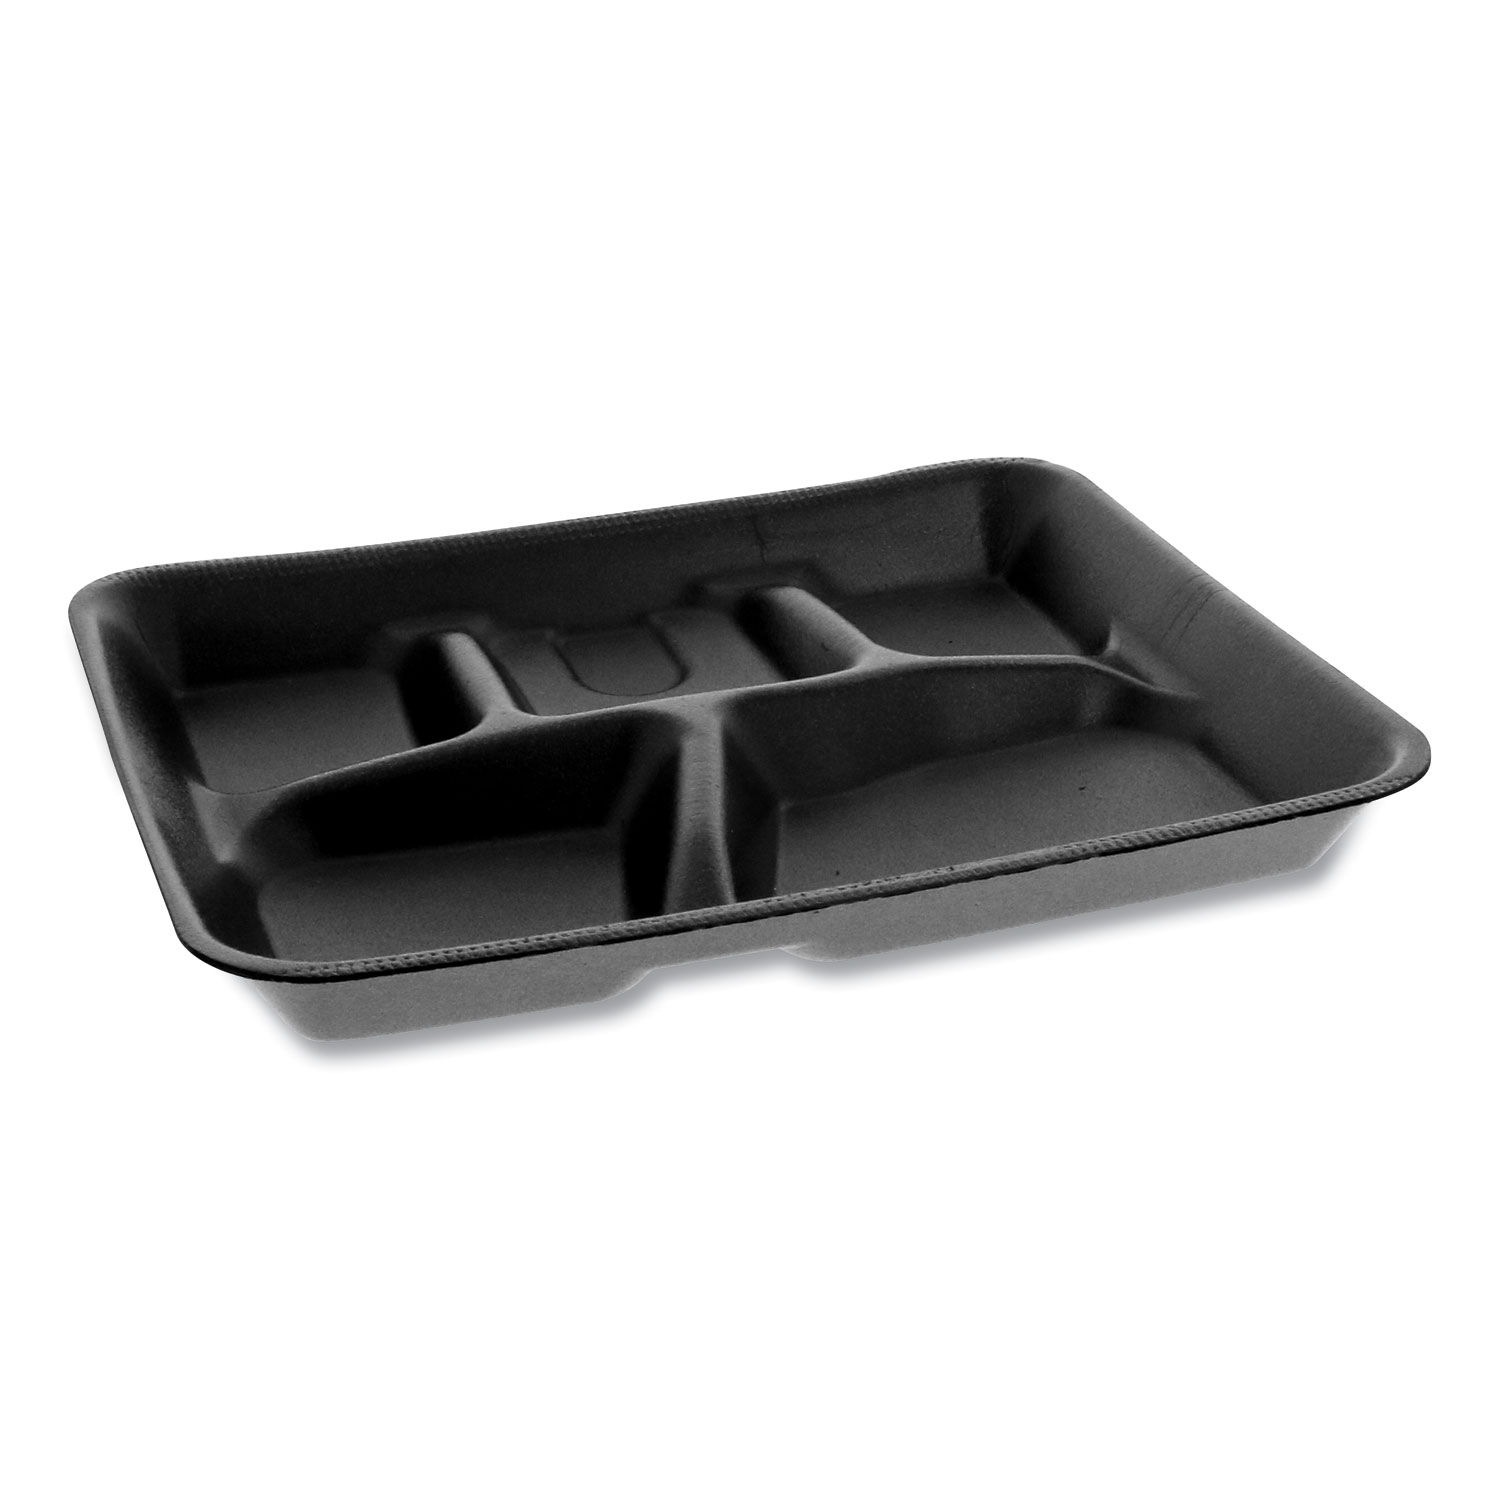 CARRYOUT (10 PIECES)(SERVE) FOOD FOAM-TRAYS FOR HOT & COLD FOODS(5